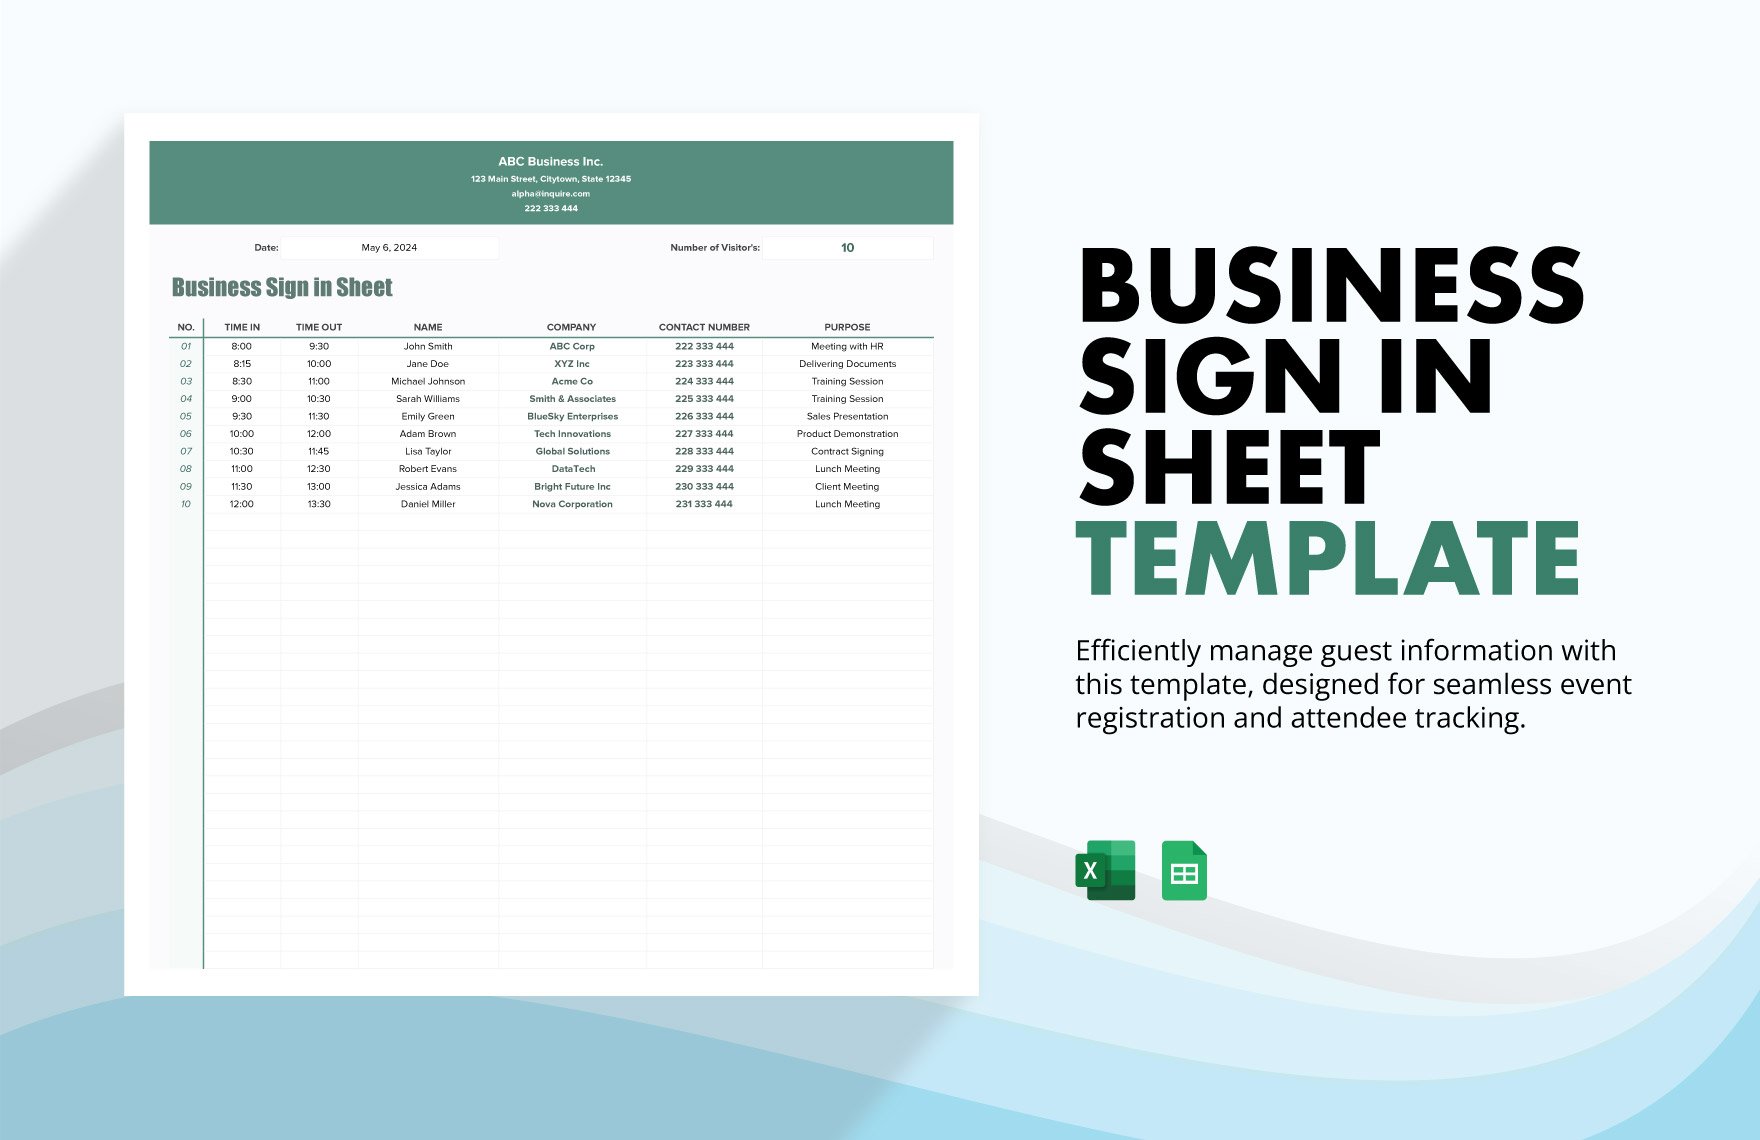 Business Sign in Sheet Template